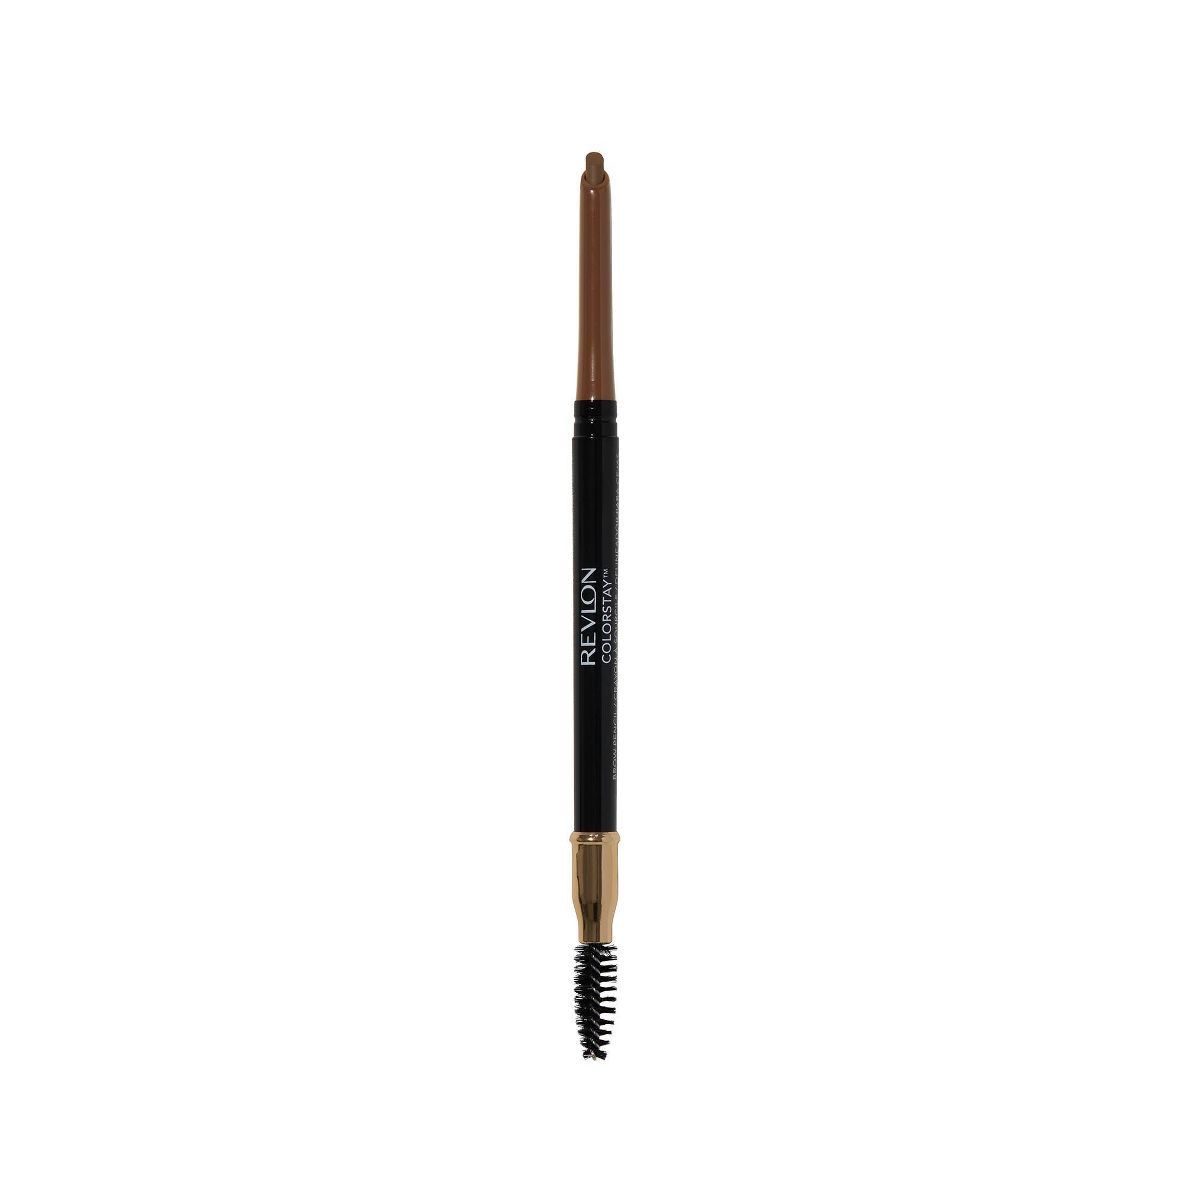 Revlon Colorstay Brow Pencil - Waterproof with Angled Tip | Target